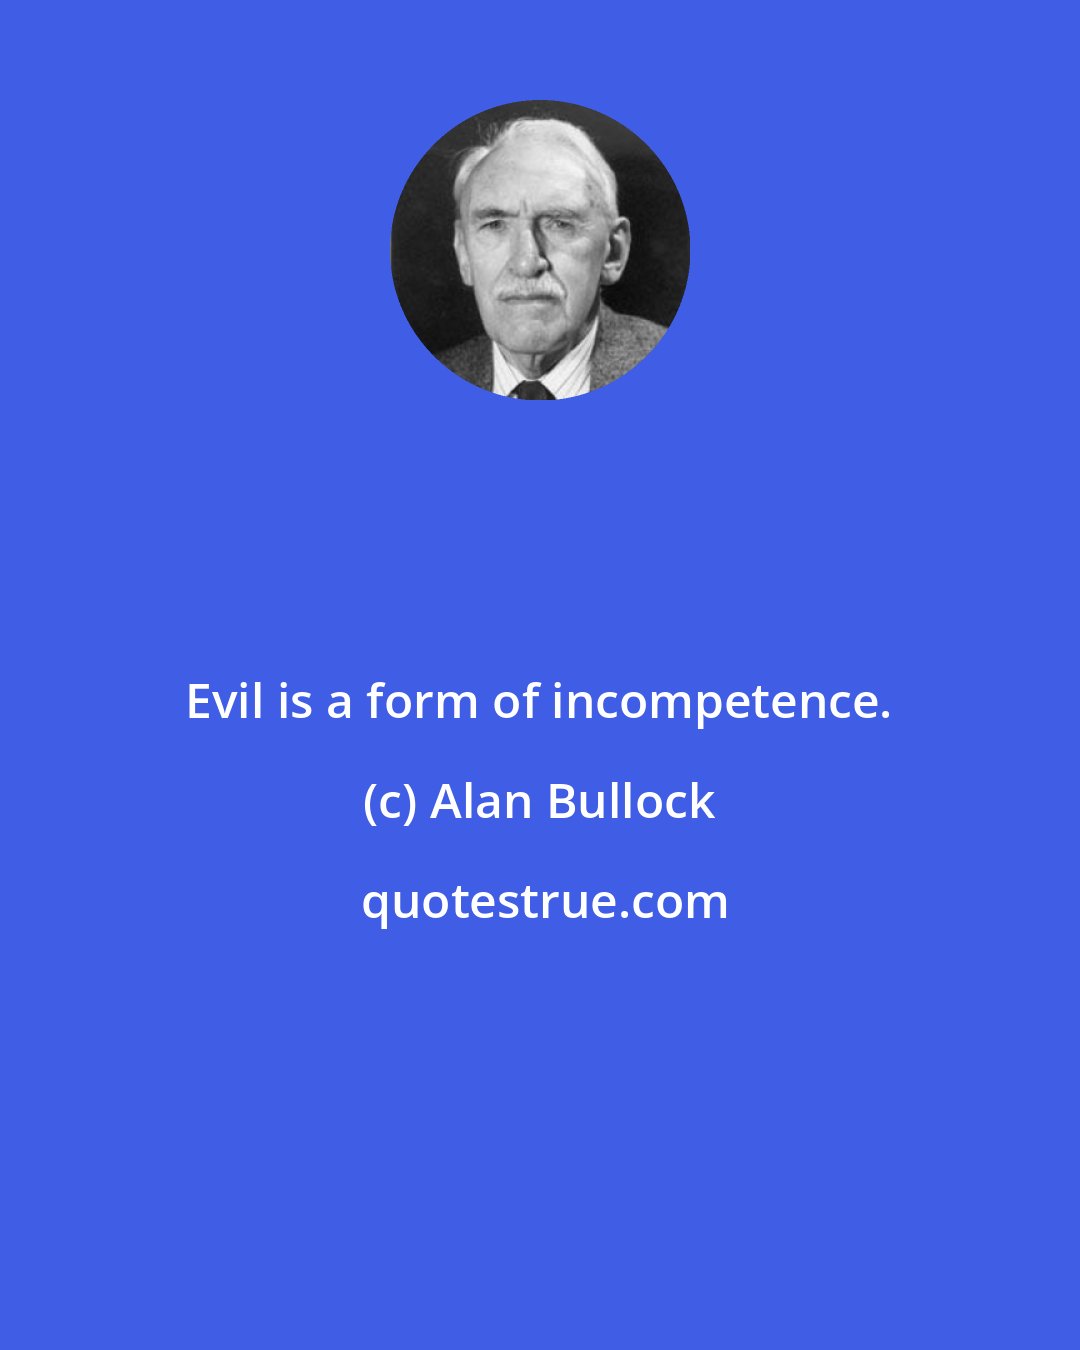 Alan Bullock: Evil is a form of incompetence.